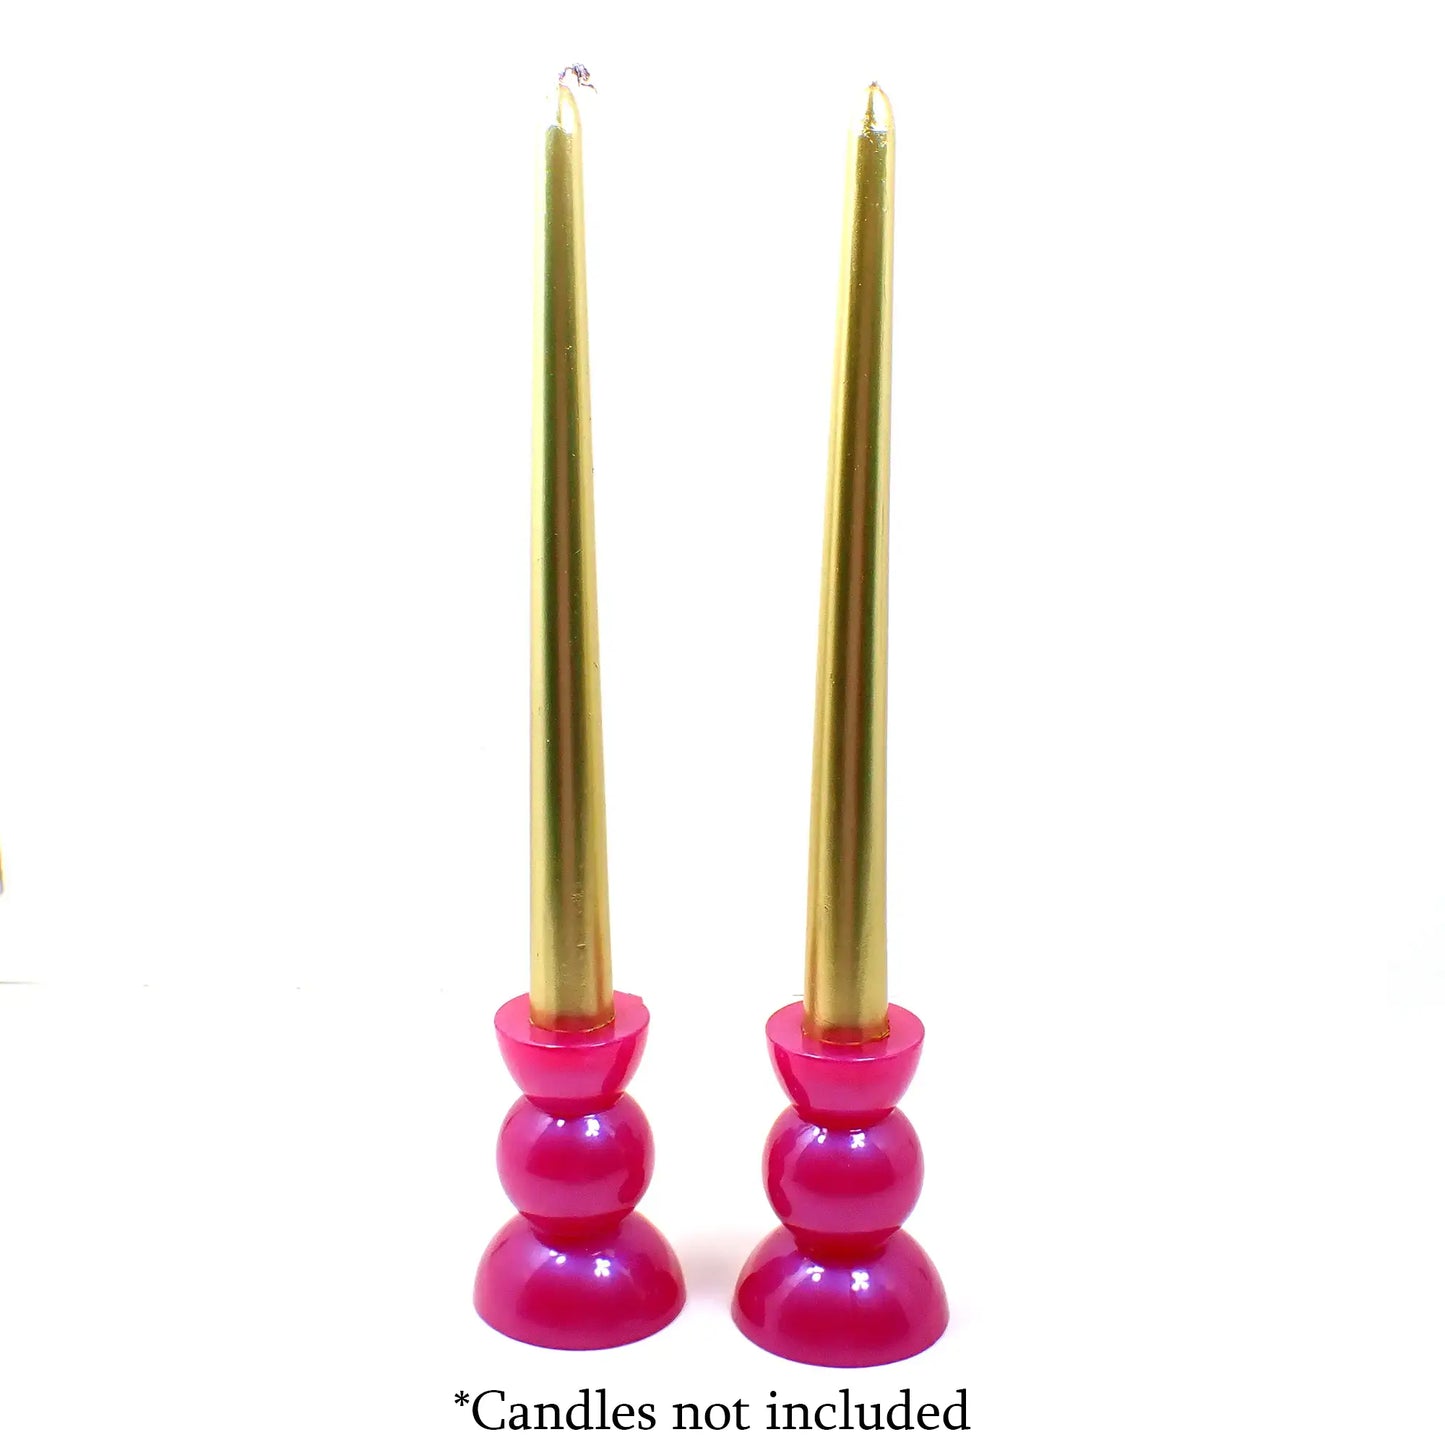 Set of Two Bright Pearly Pink Resin Handmade Rounded Geometric Candlestick Holders